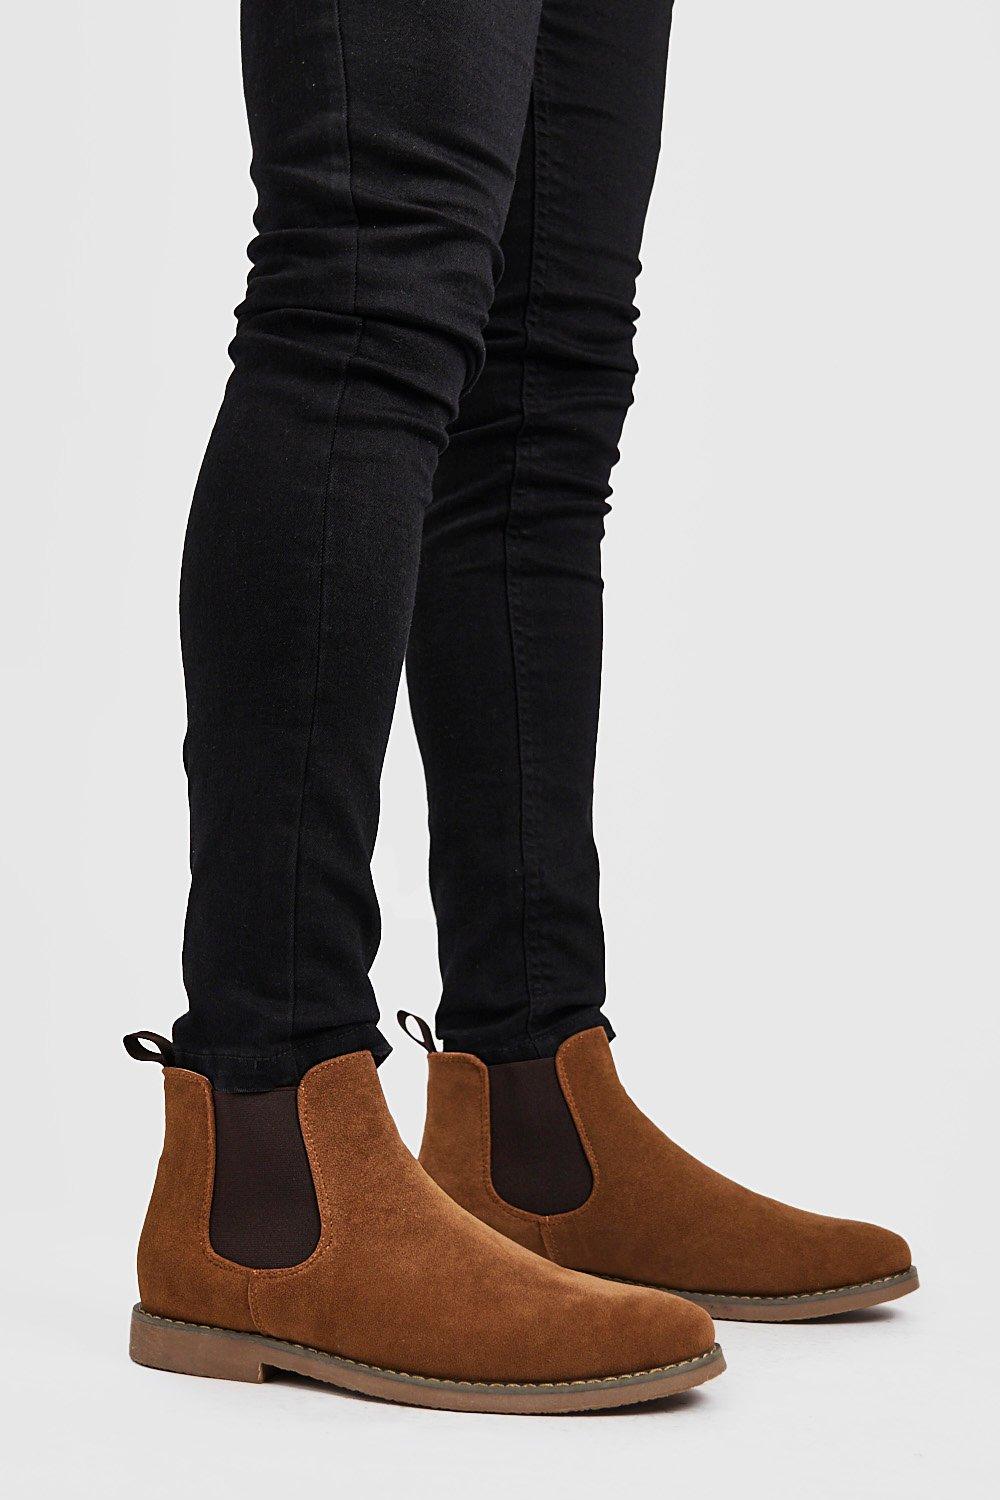 chelsea boots canada